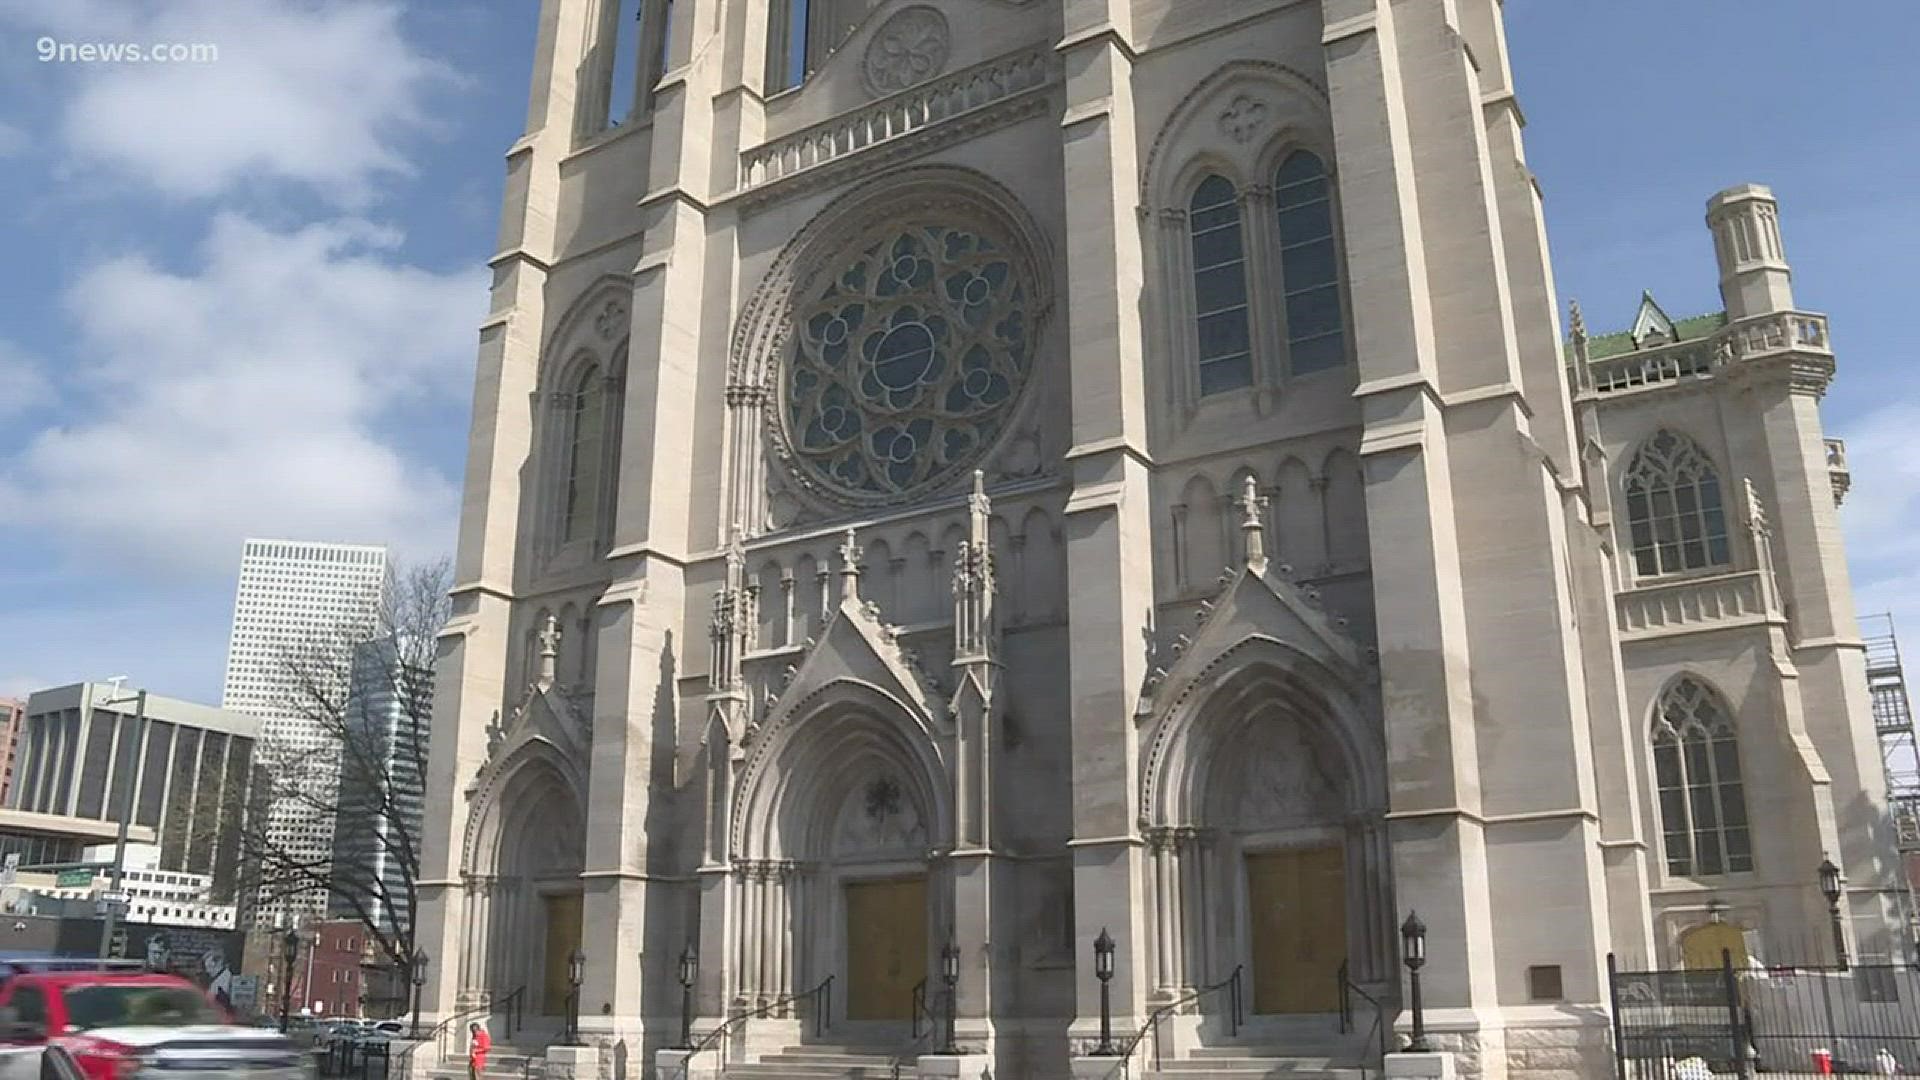 The Cathedral Basilica of the Immaculate Conception offered guests sandwiches, coffee, and a card to sign and send for Mother's Day.